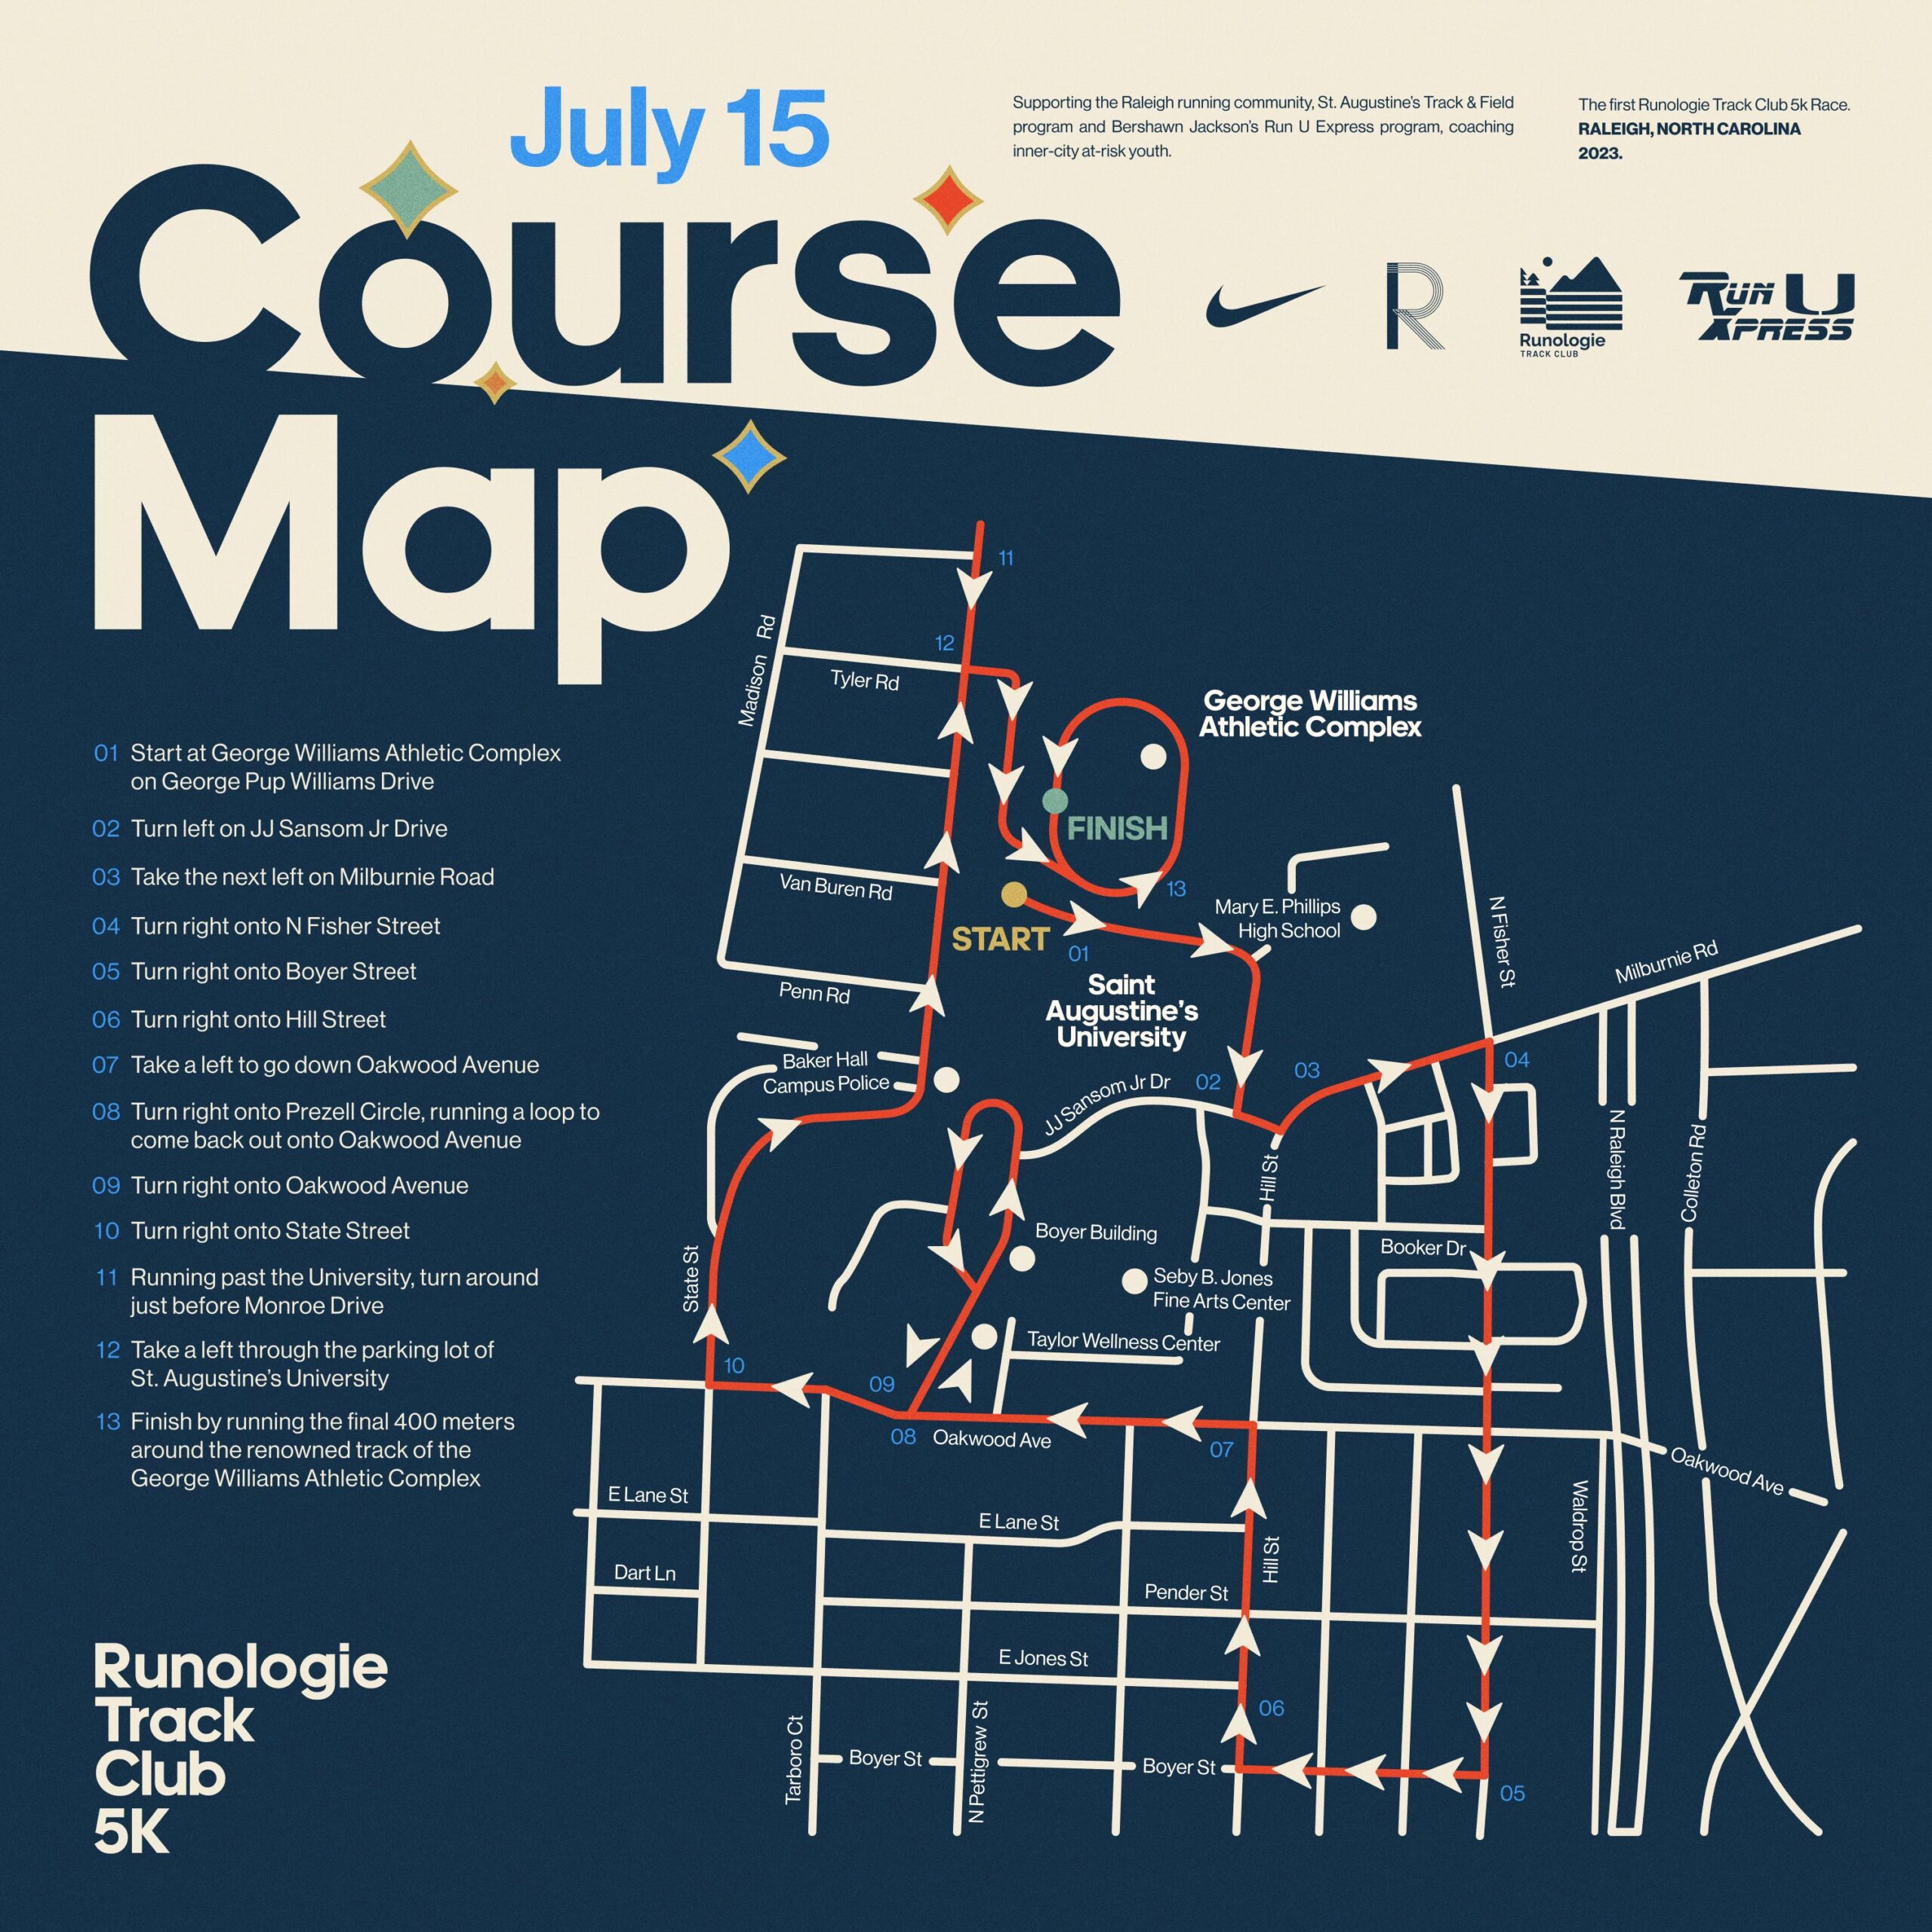 RTC 5k Course map